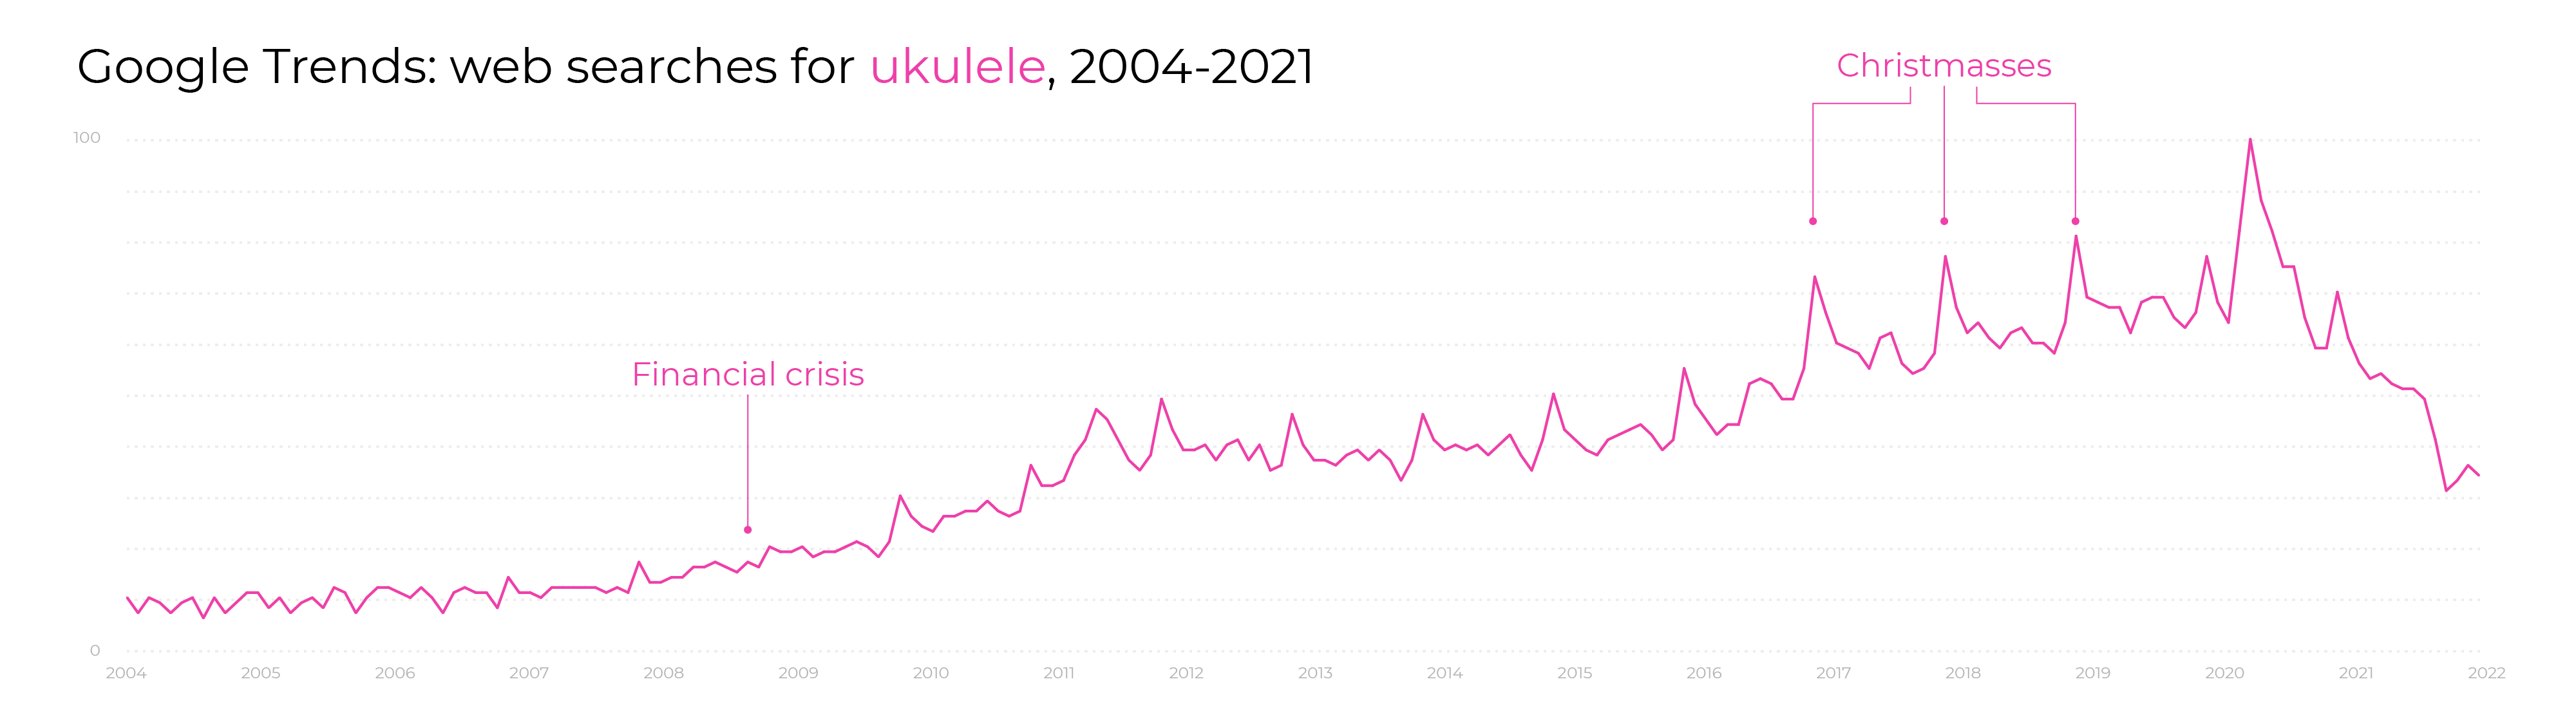 Chart showing the rise in popularity of the ukulele